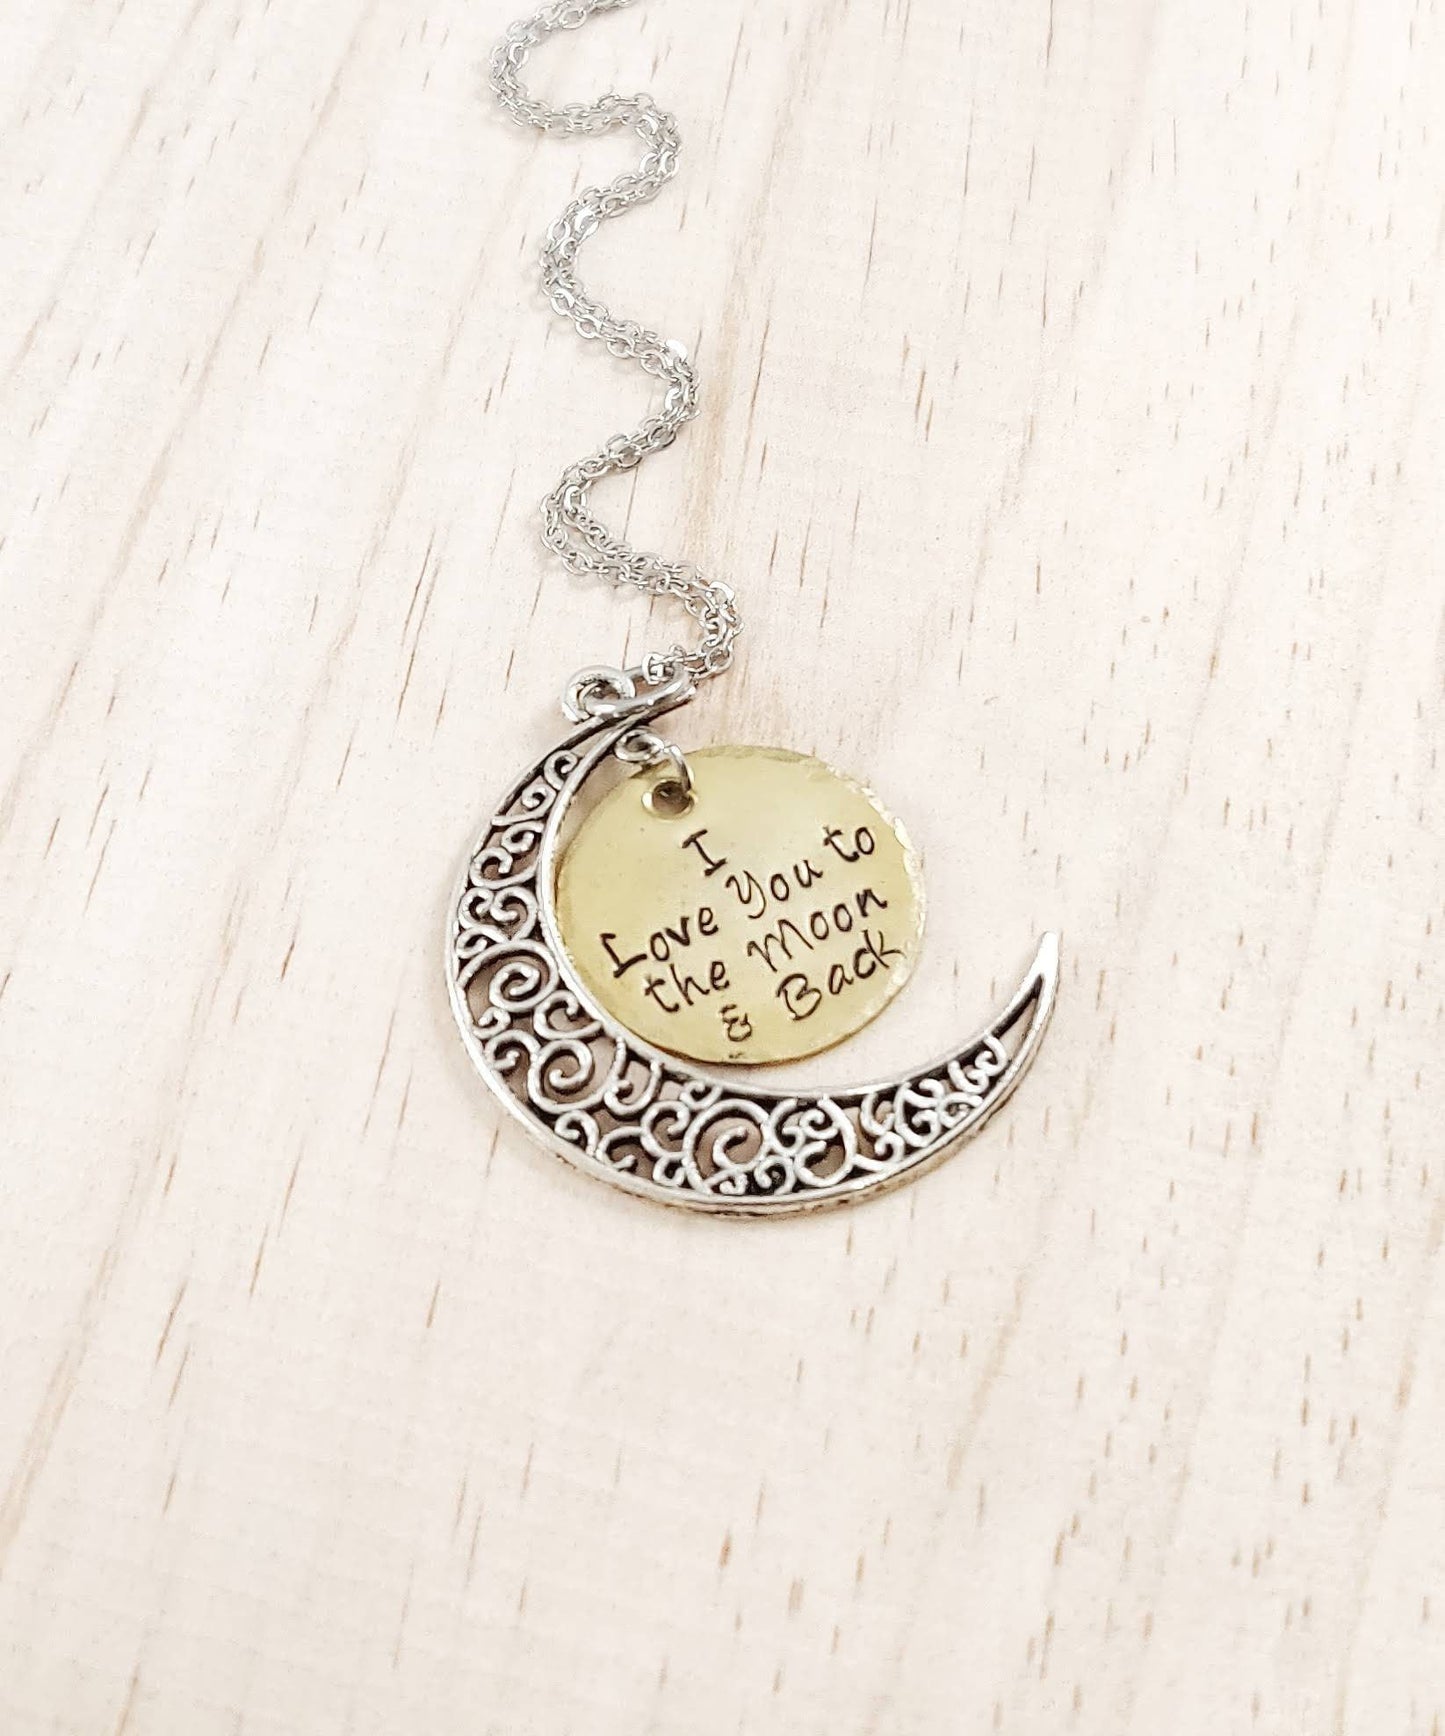 I Love You to the Moon and Back, I Love You to the Moon and Back Necklace, Gift for Mom, Gift for Daughter, Necklace for Daughter